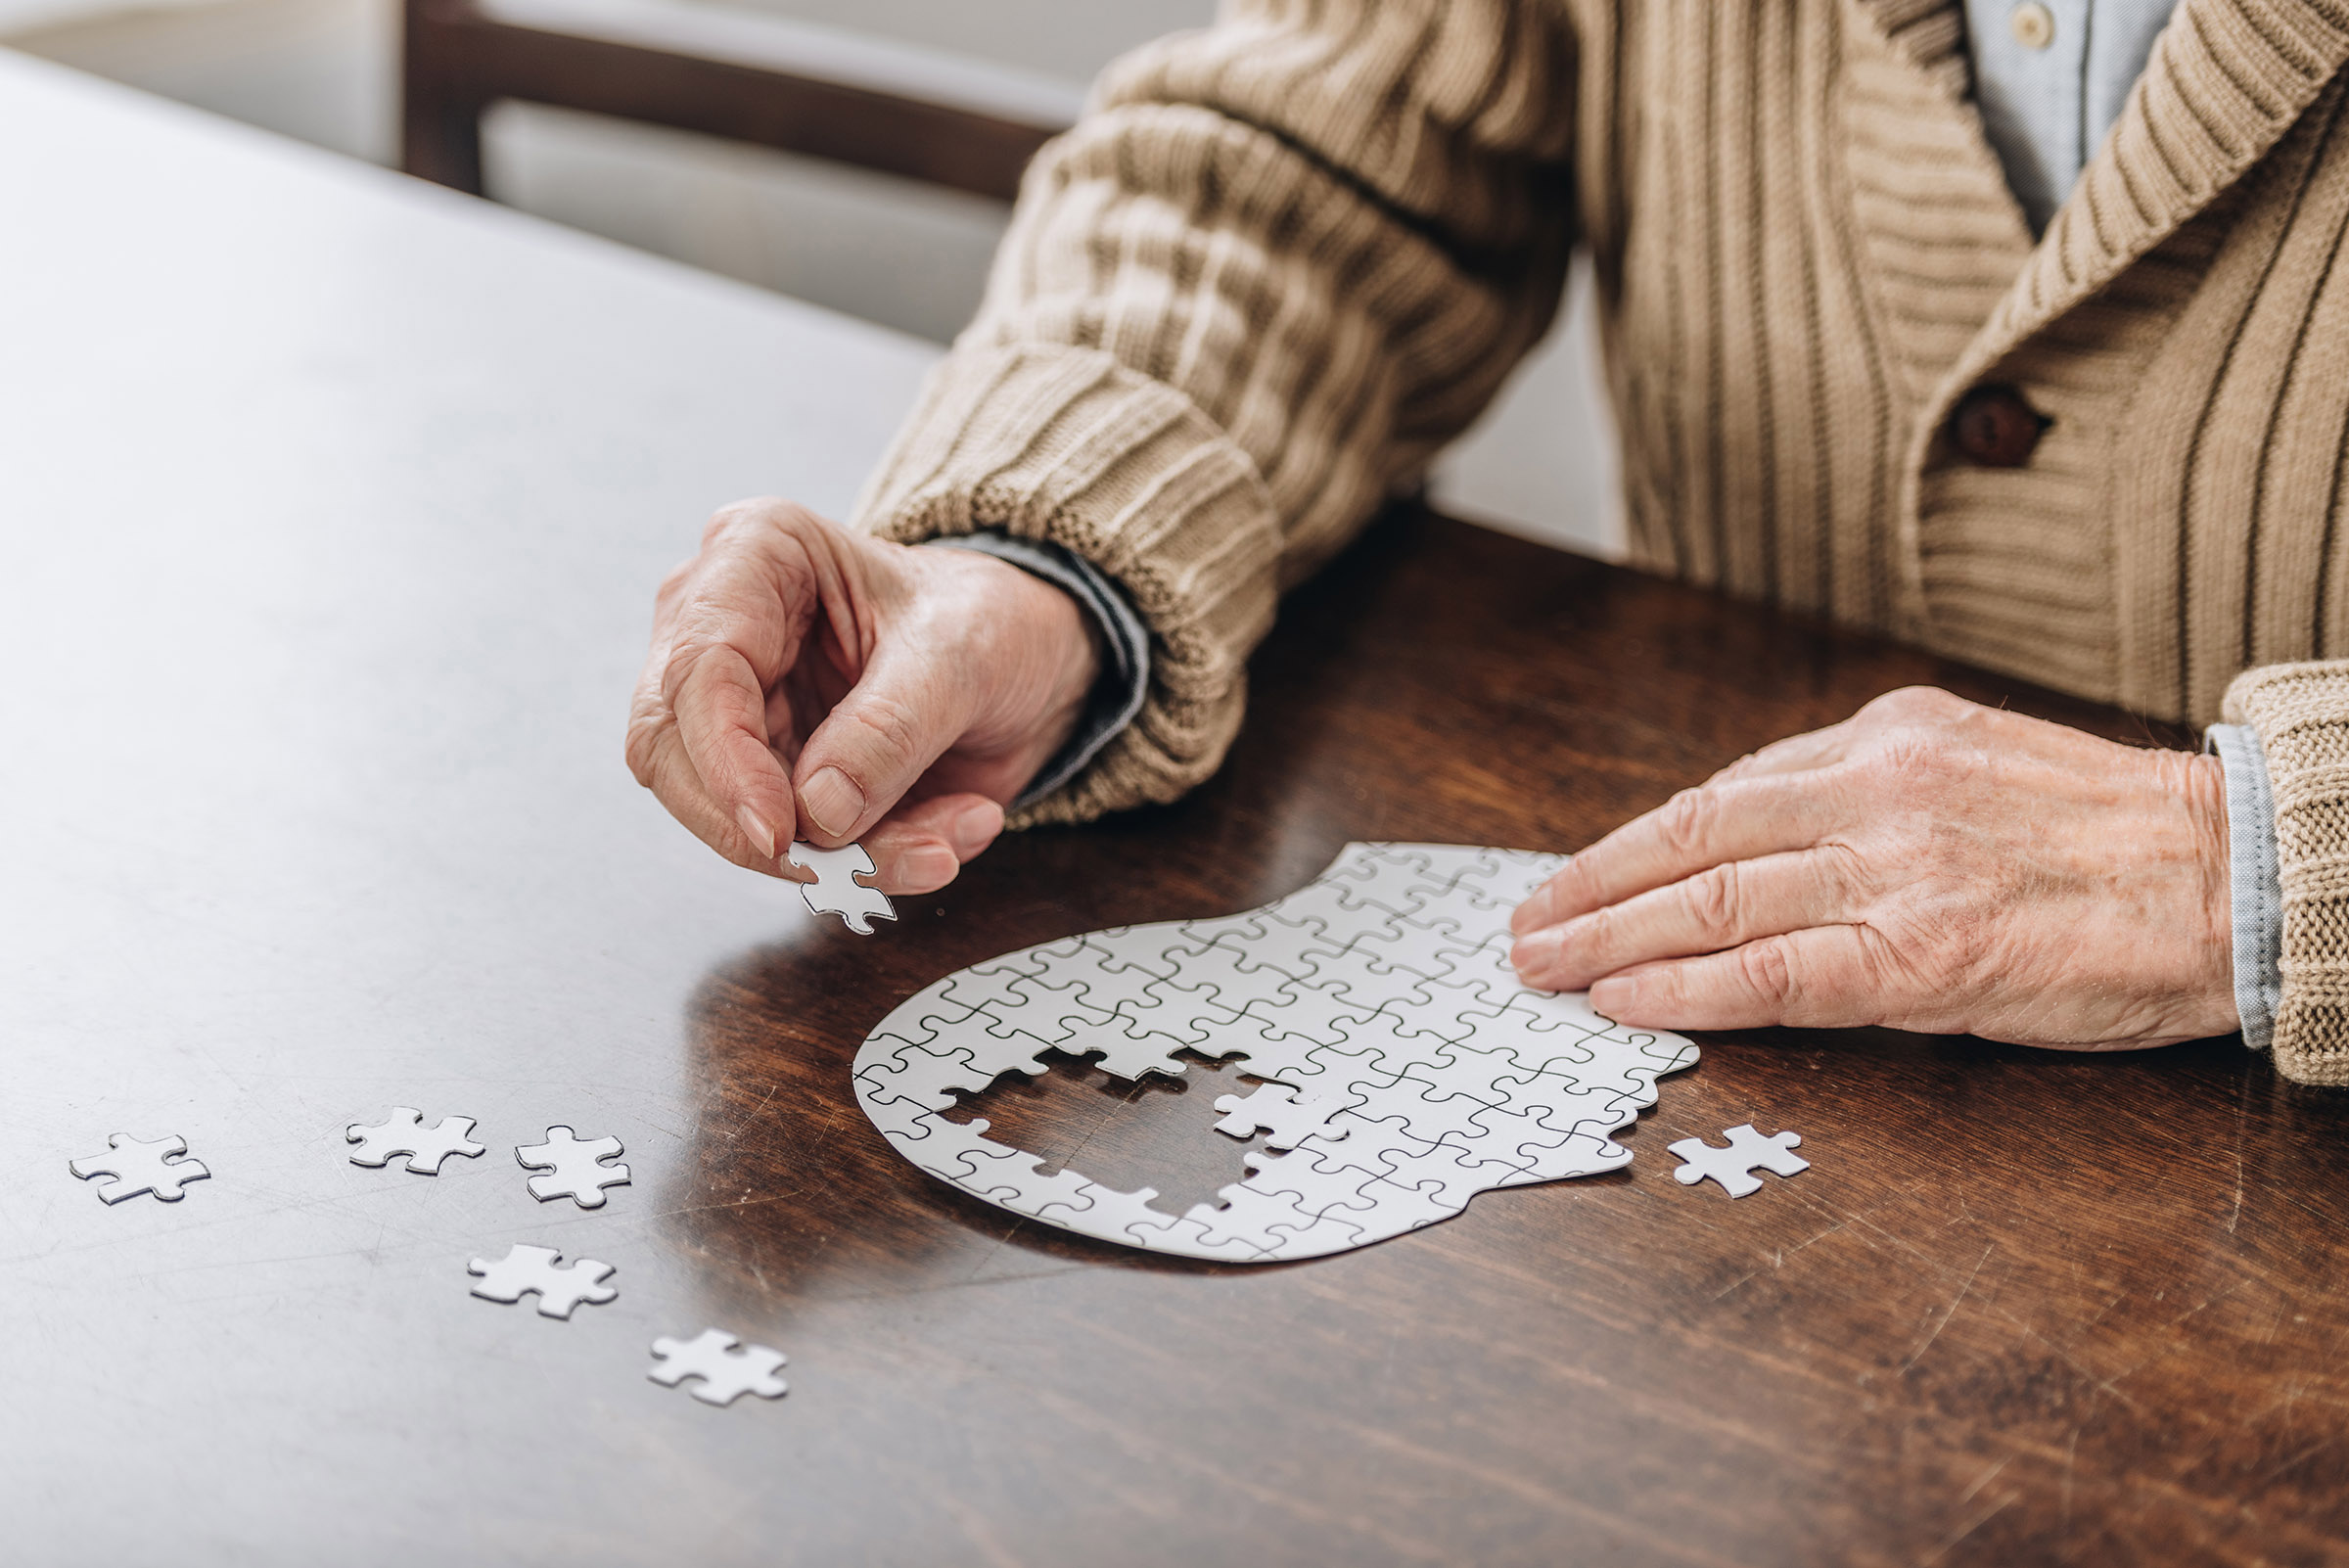 A senior playing with puzzles. (LightFieldStudios—Getty Images/iStockphoto)